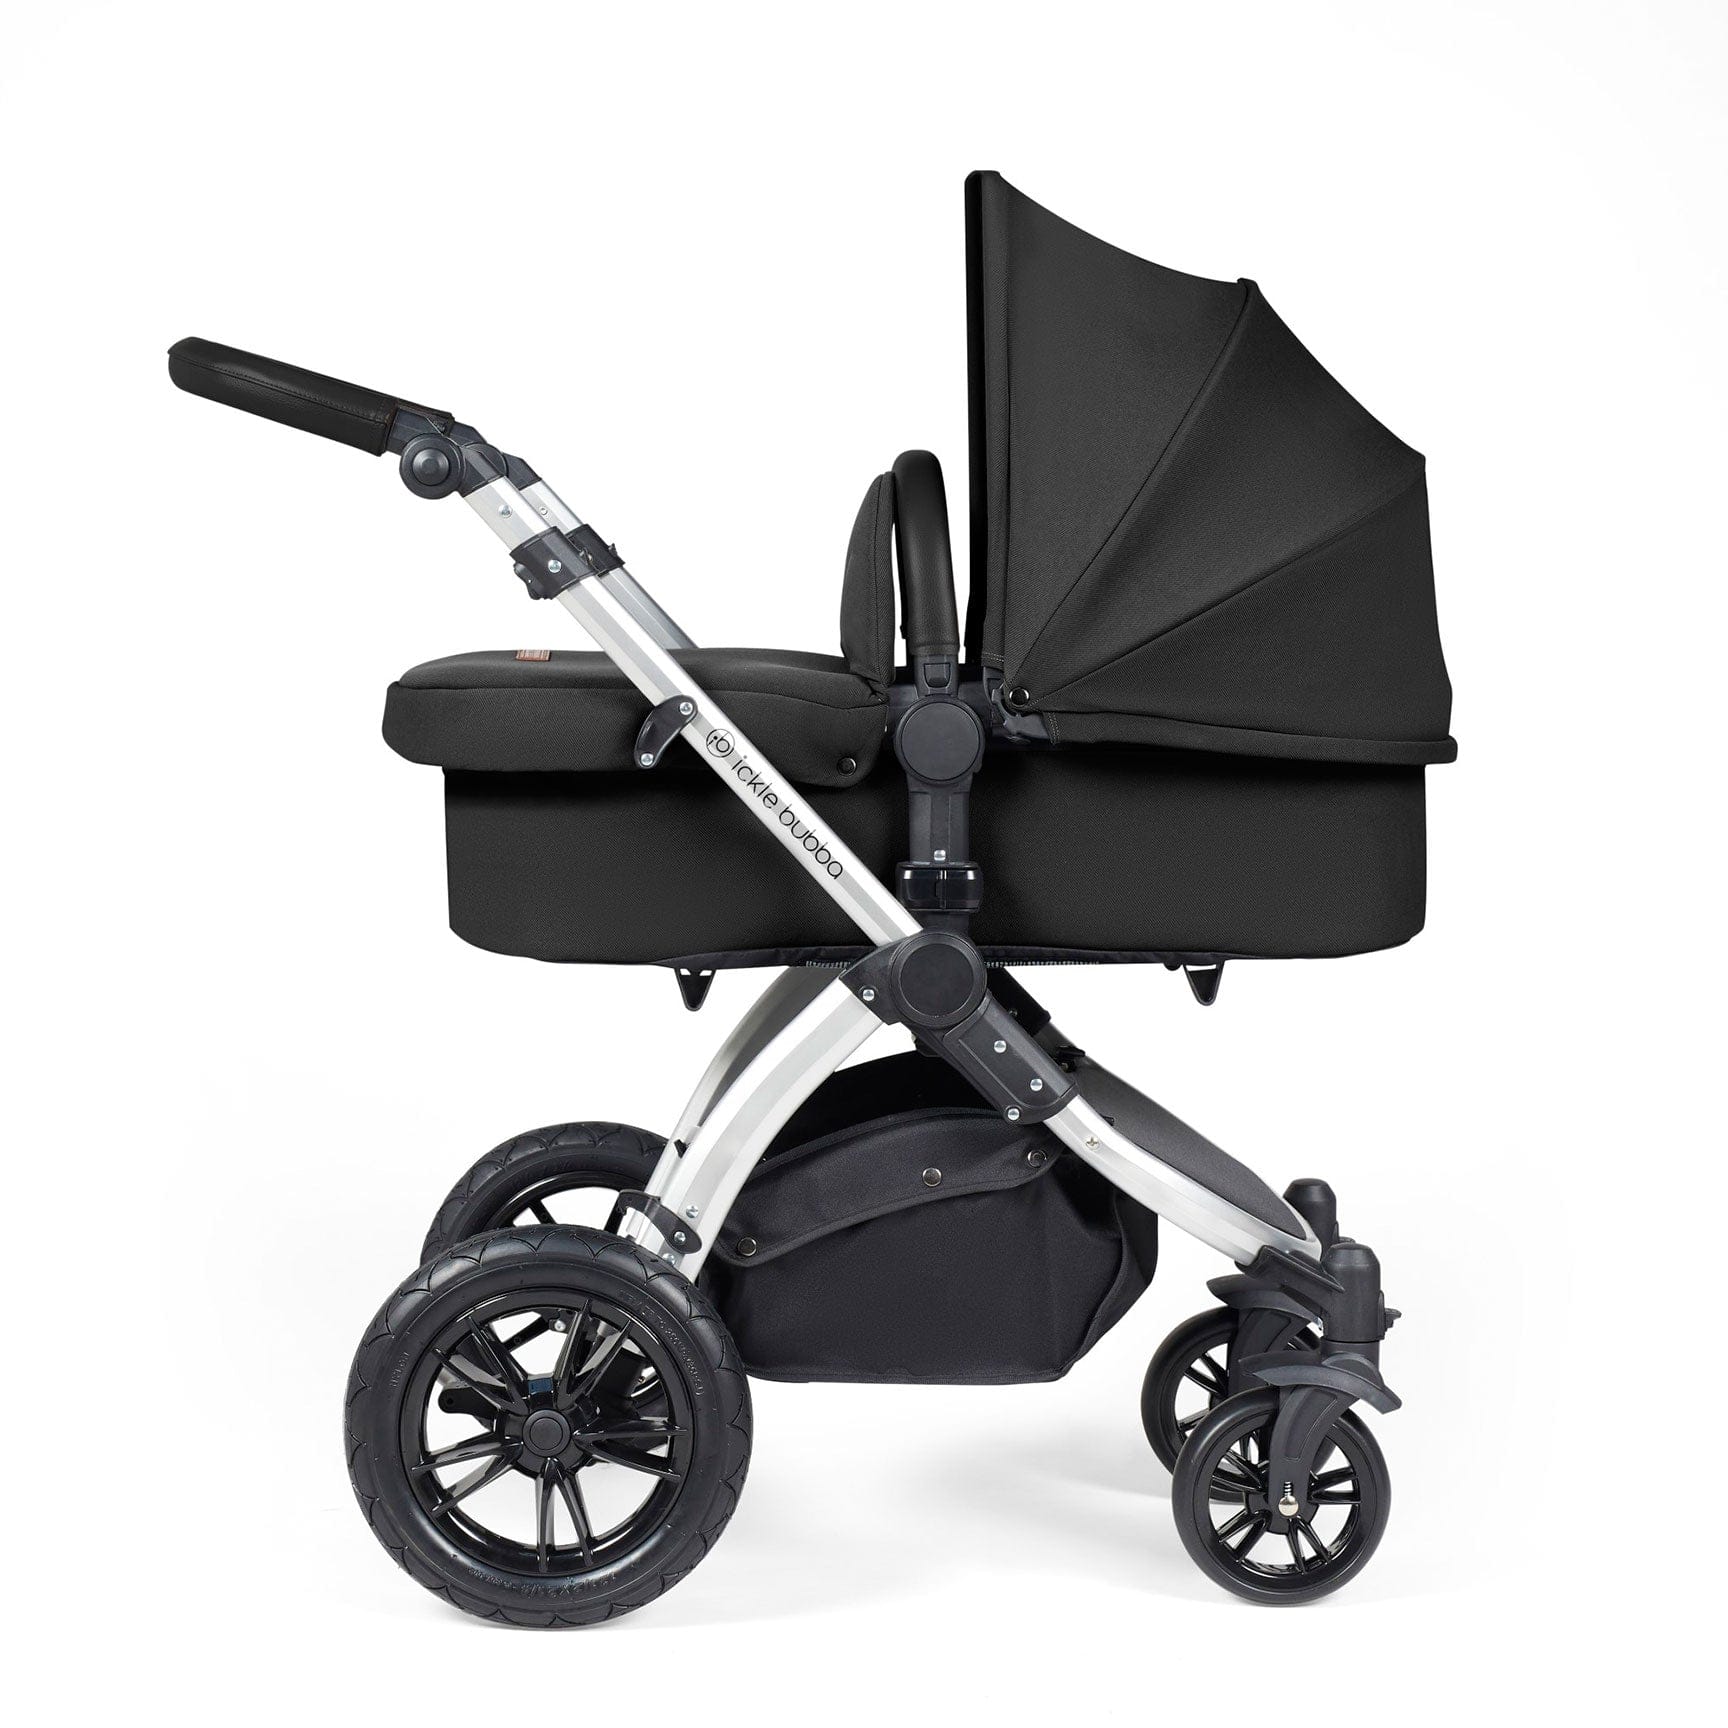 Ickle Bubba Stomp Luxe 2-in-1 Plus Pushchair & Carrycot in Silver/Midnight/Black Travel Systems 10-003-001-249 5056515026290